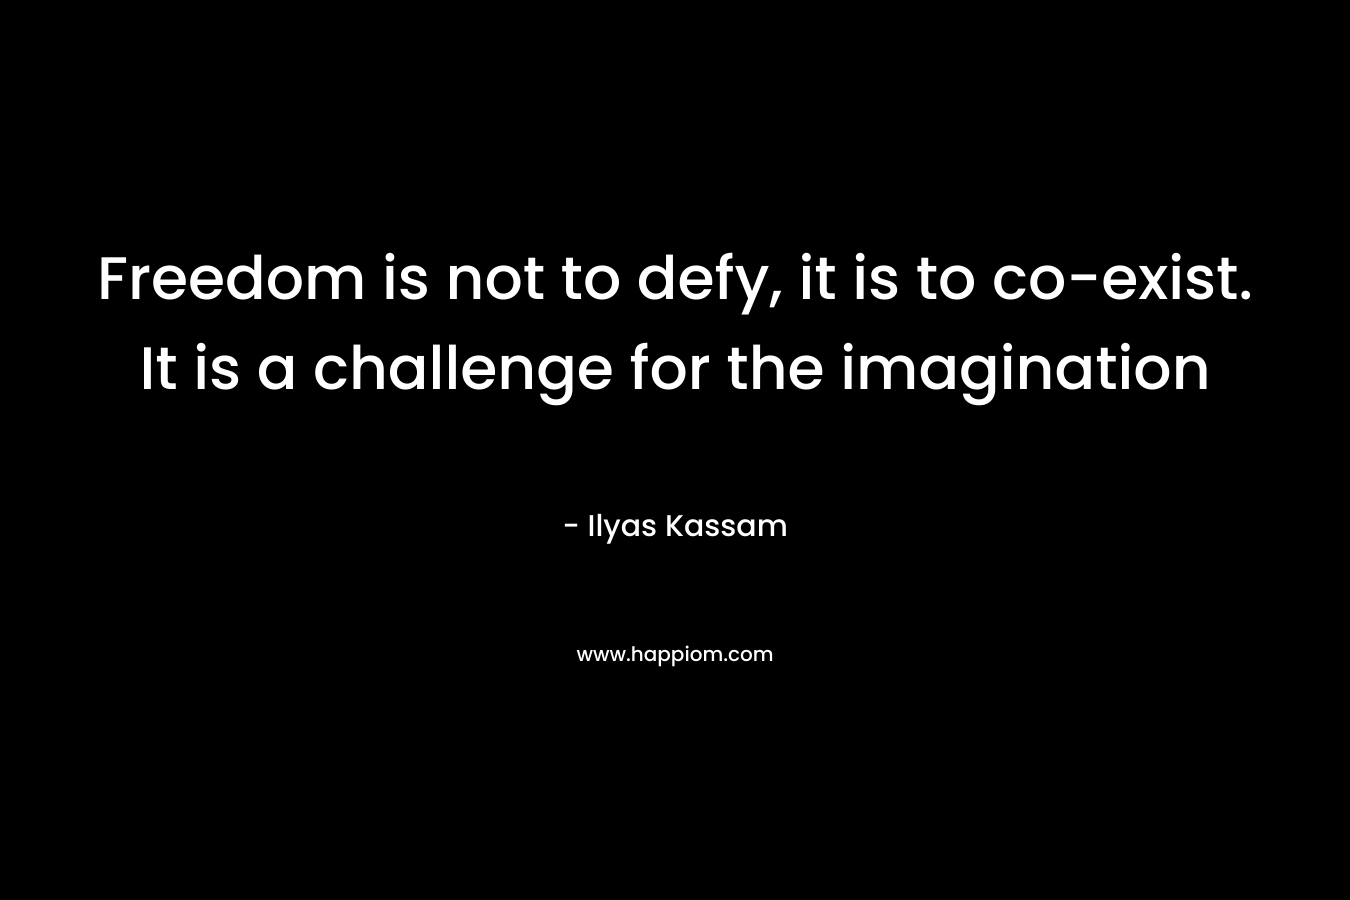 Freedom is not to defy, it is to co-exist. It is a challenge for the imagination